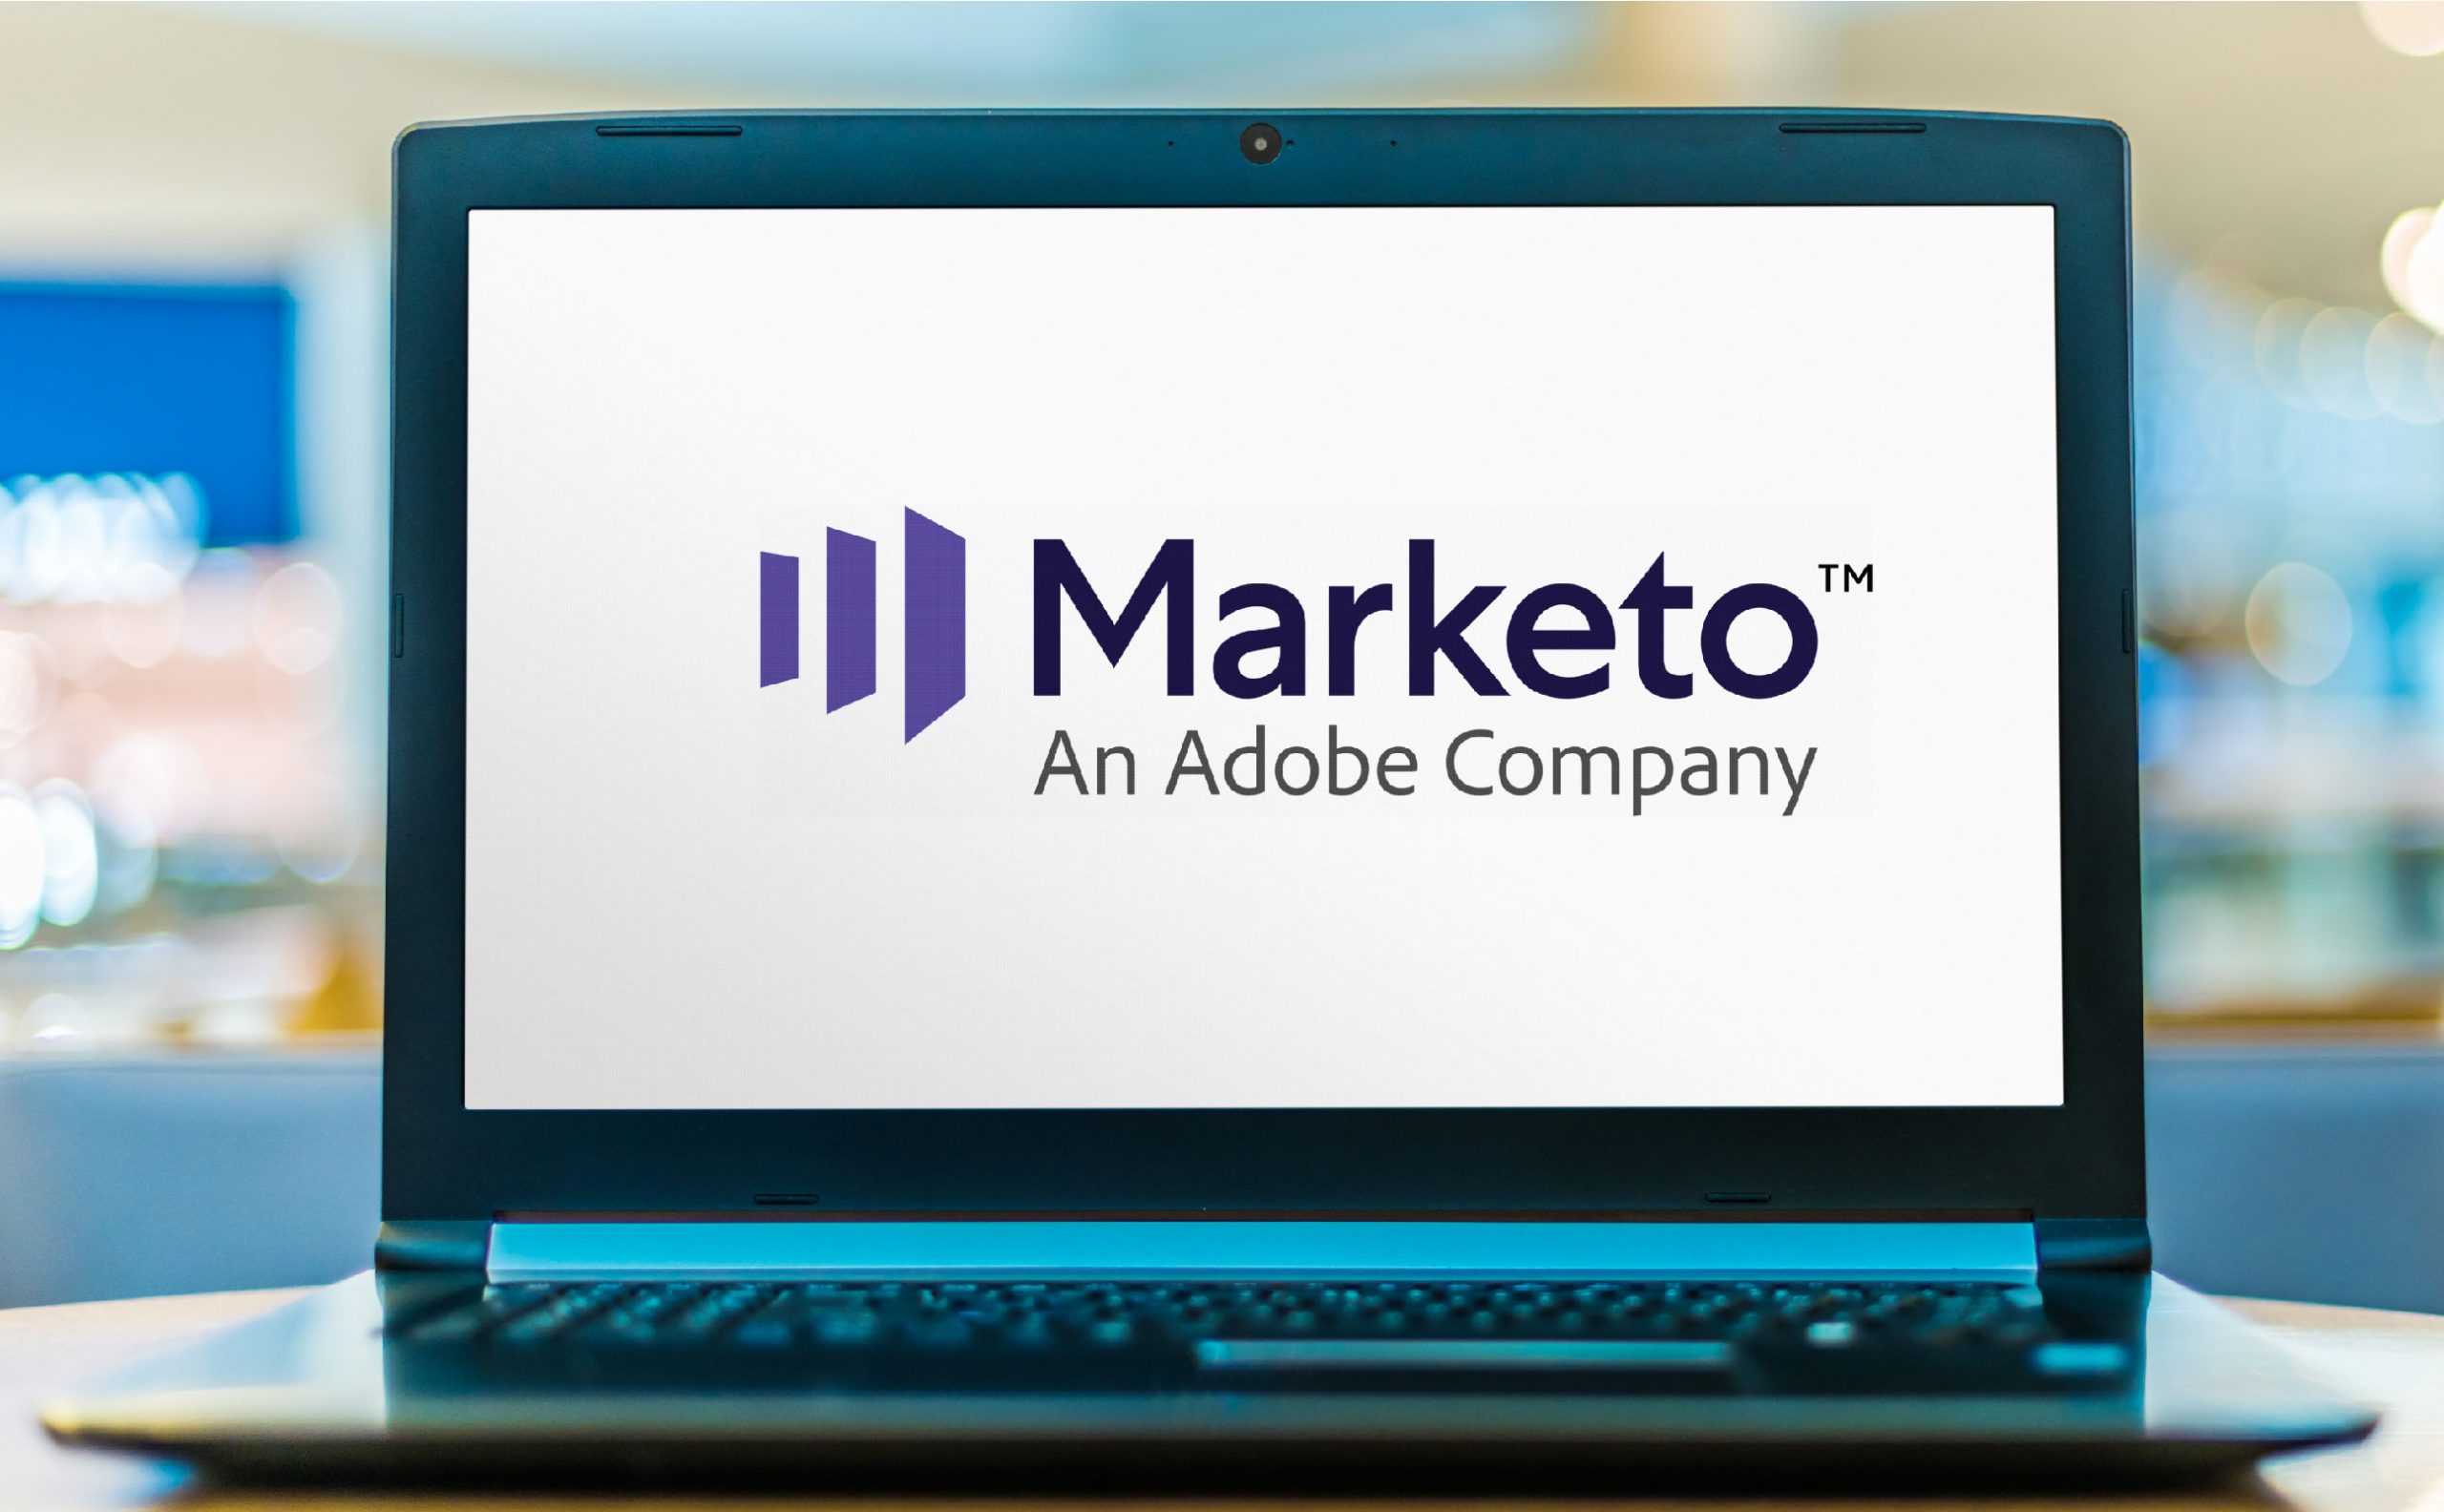 A laptop with the Adobe Marketo logo on its screen.